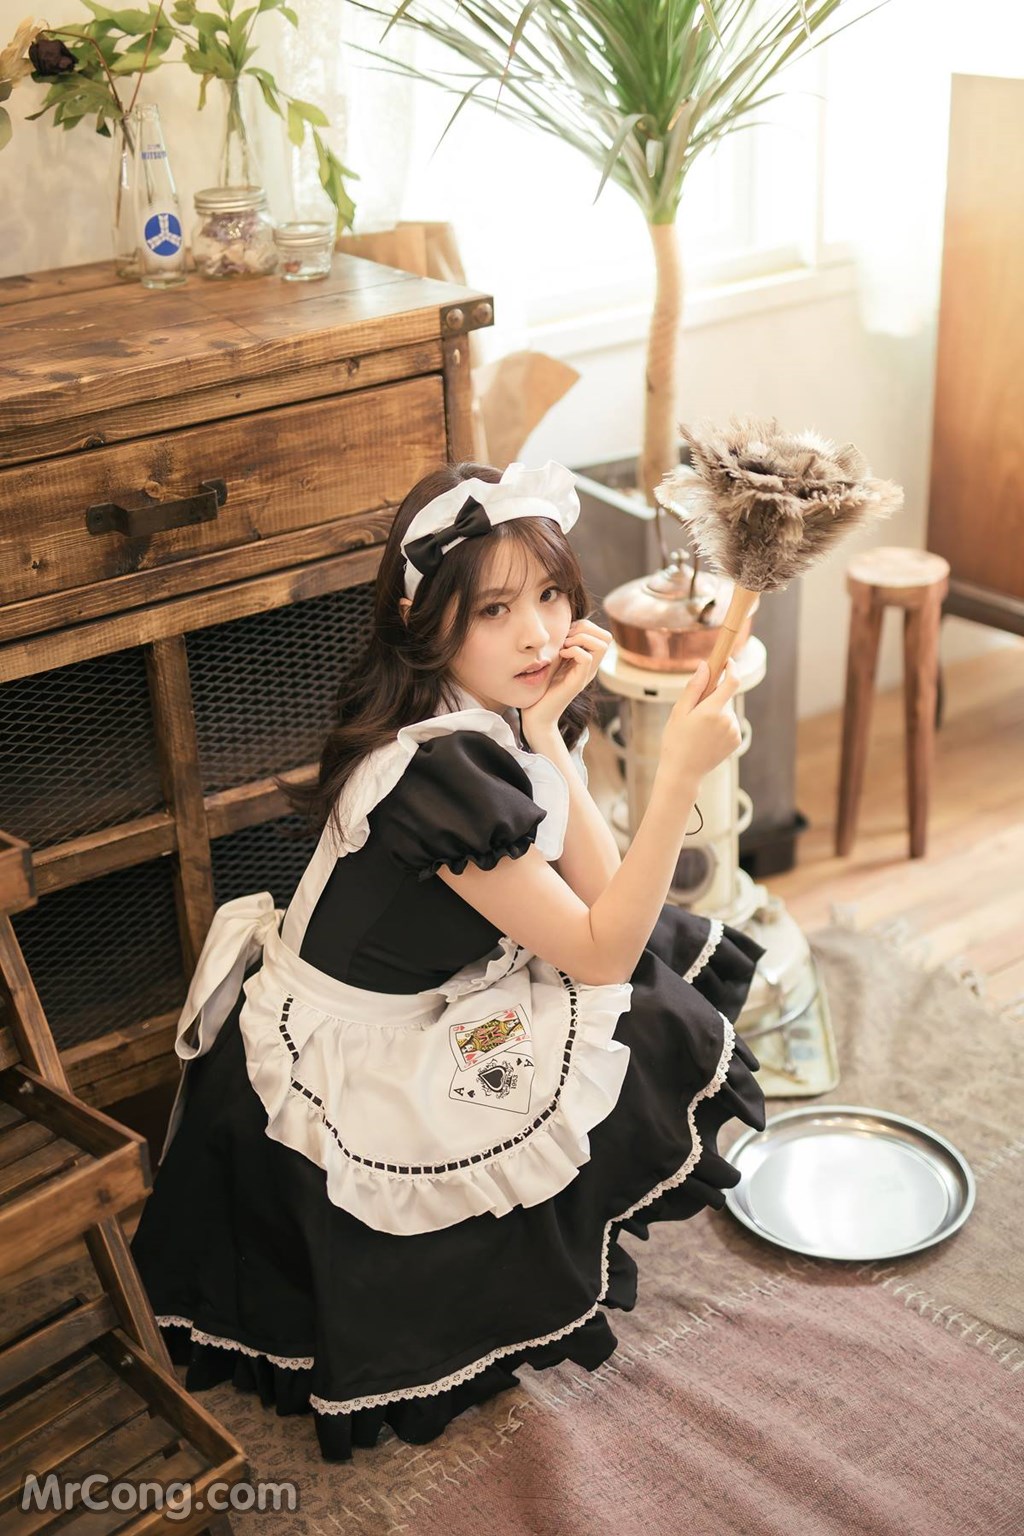 Beautiful Kwon Hyuk Jeong cute pose with maid outfit (13 photos)